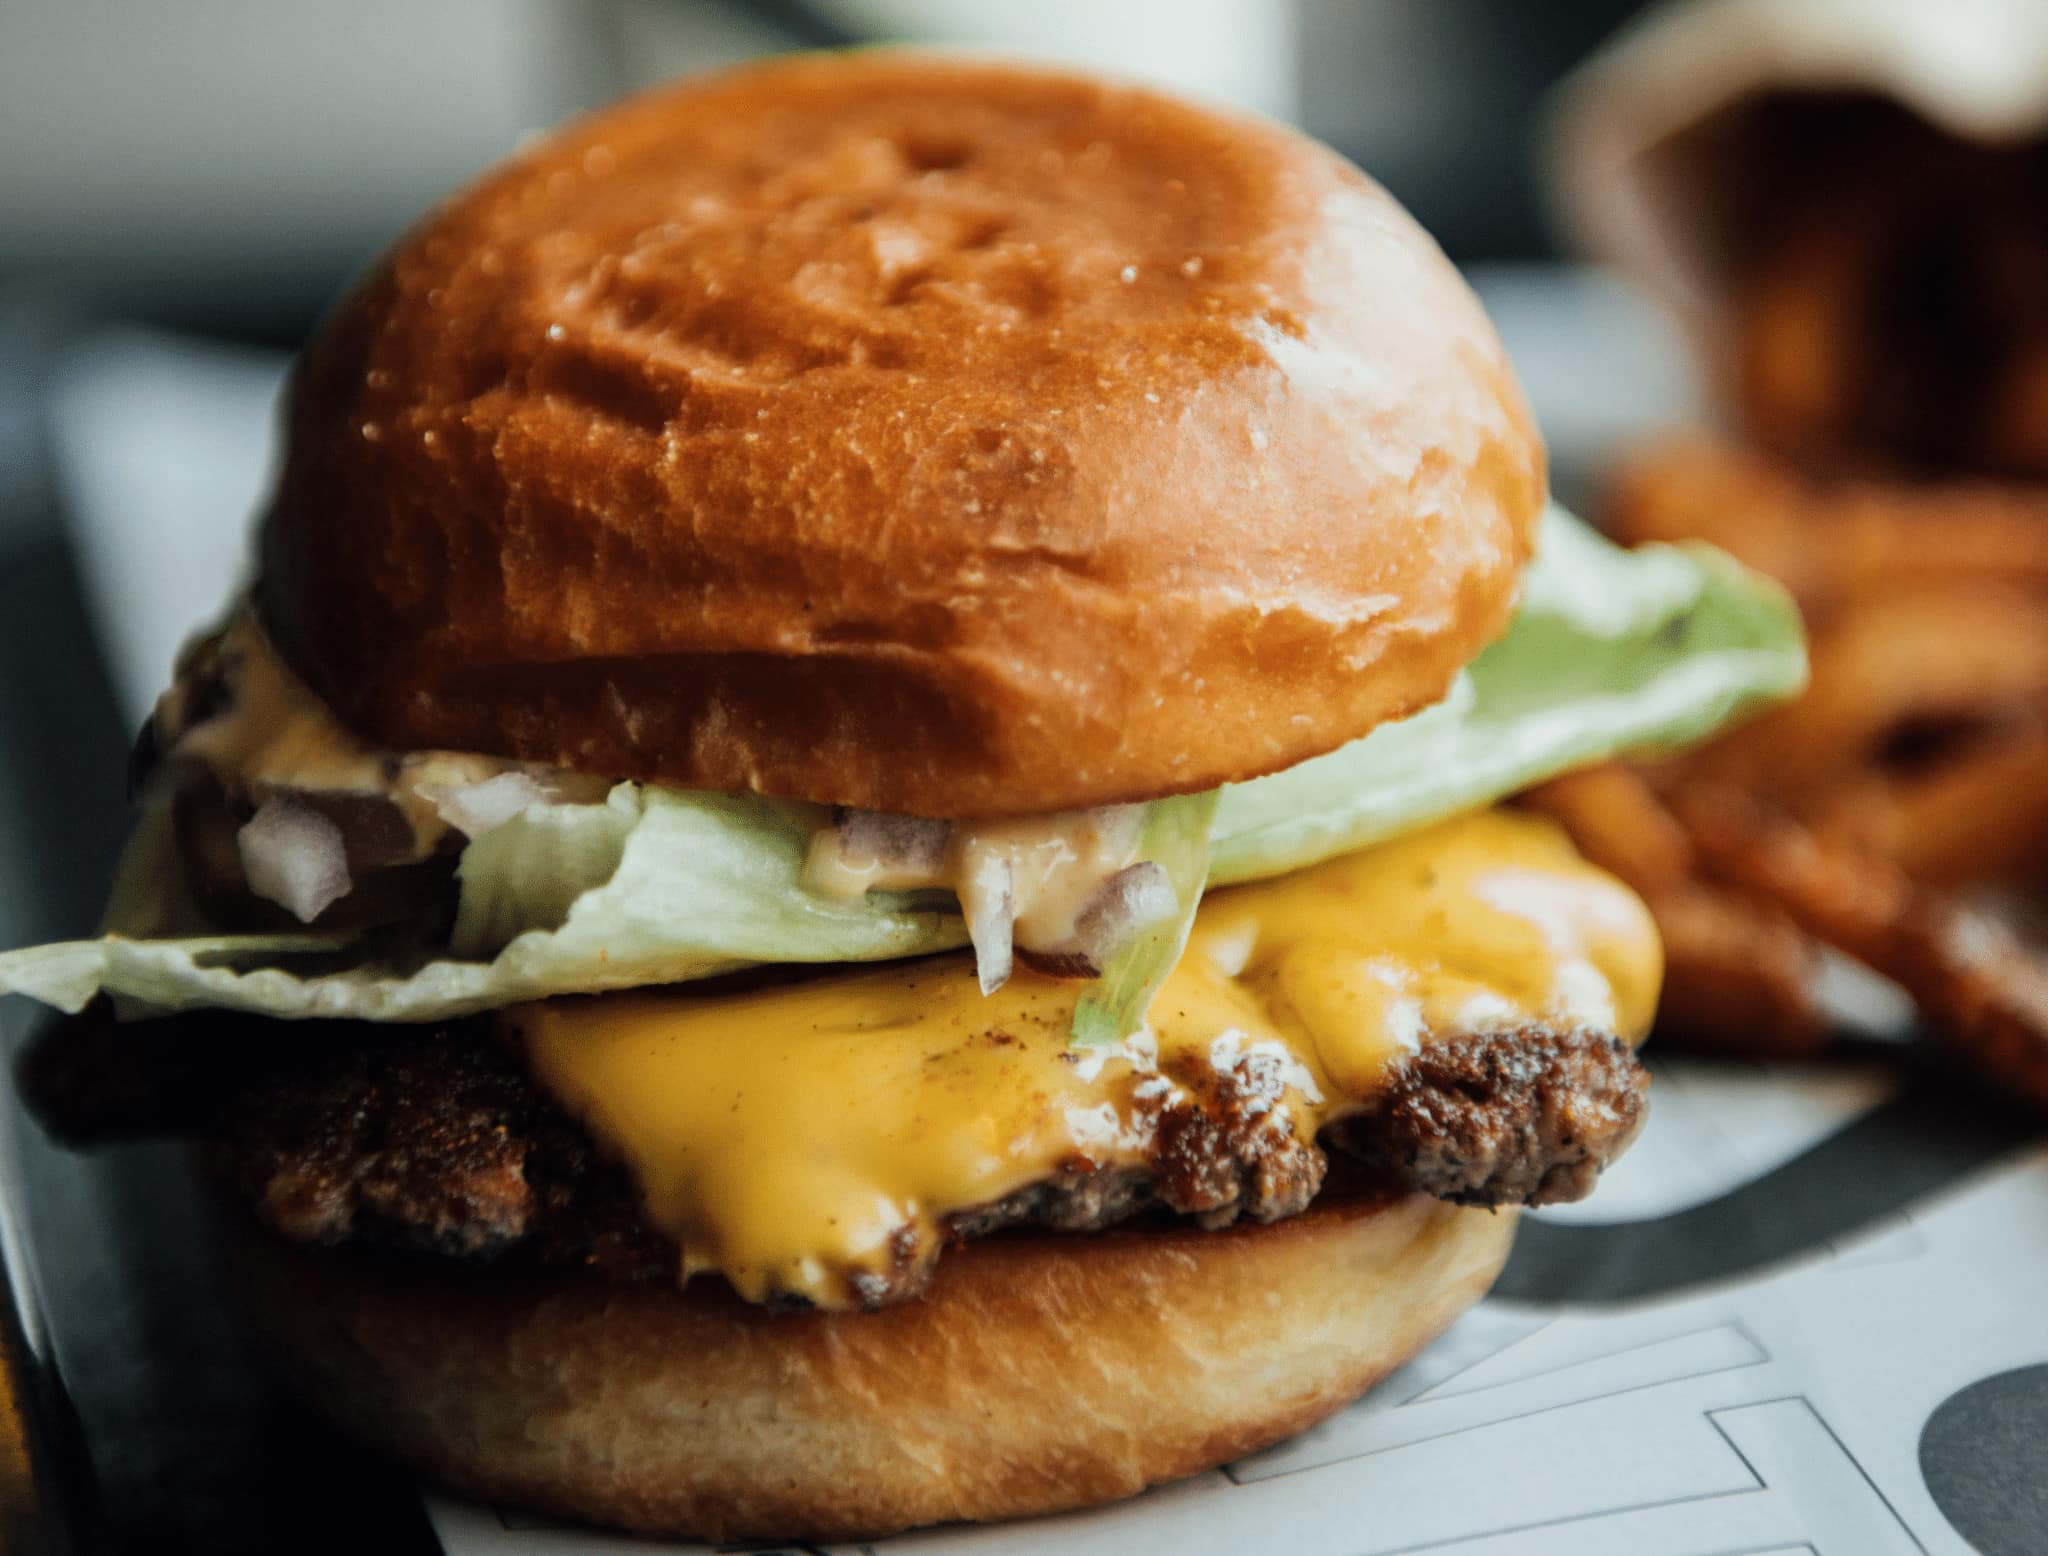 The Best Burgers in Montreal: Our top ranked burgers